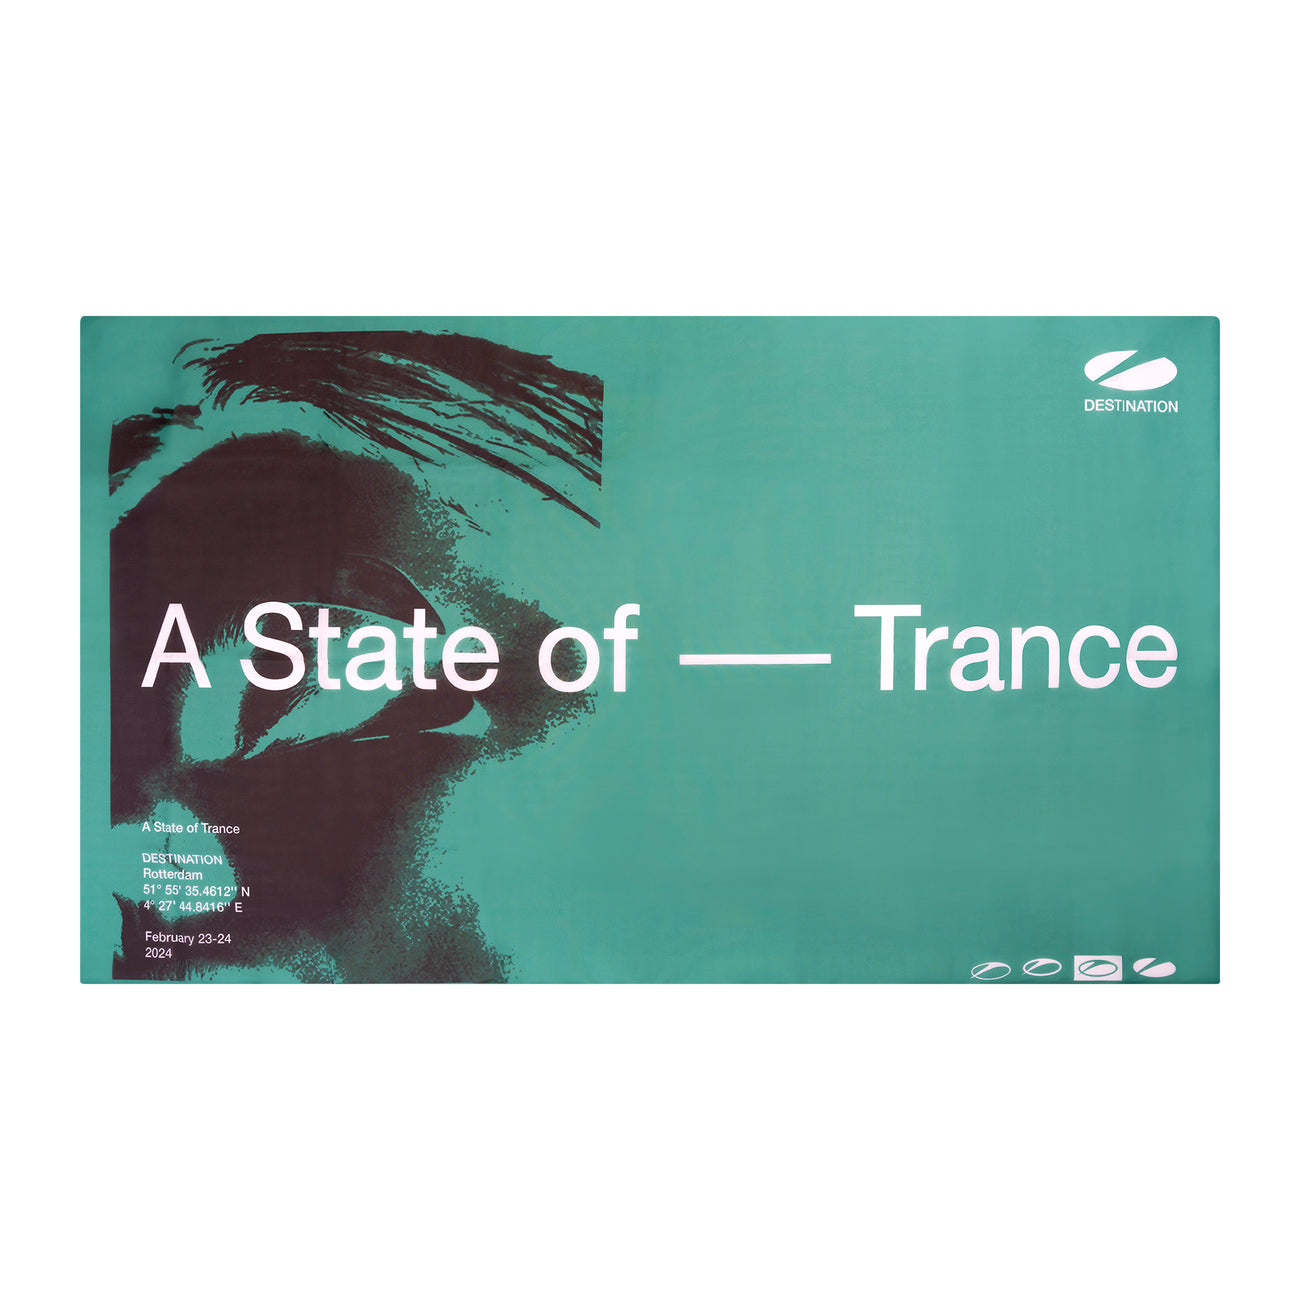 A State of Trance DESTINATION Flag